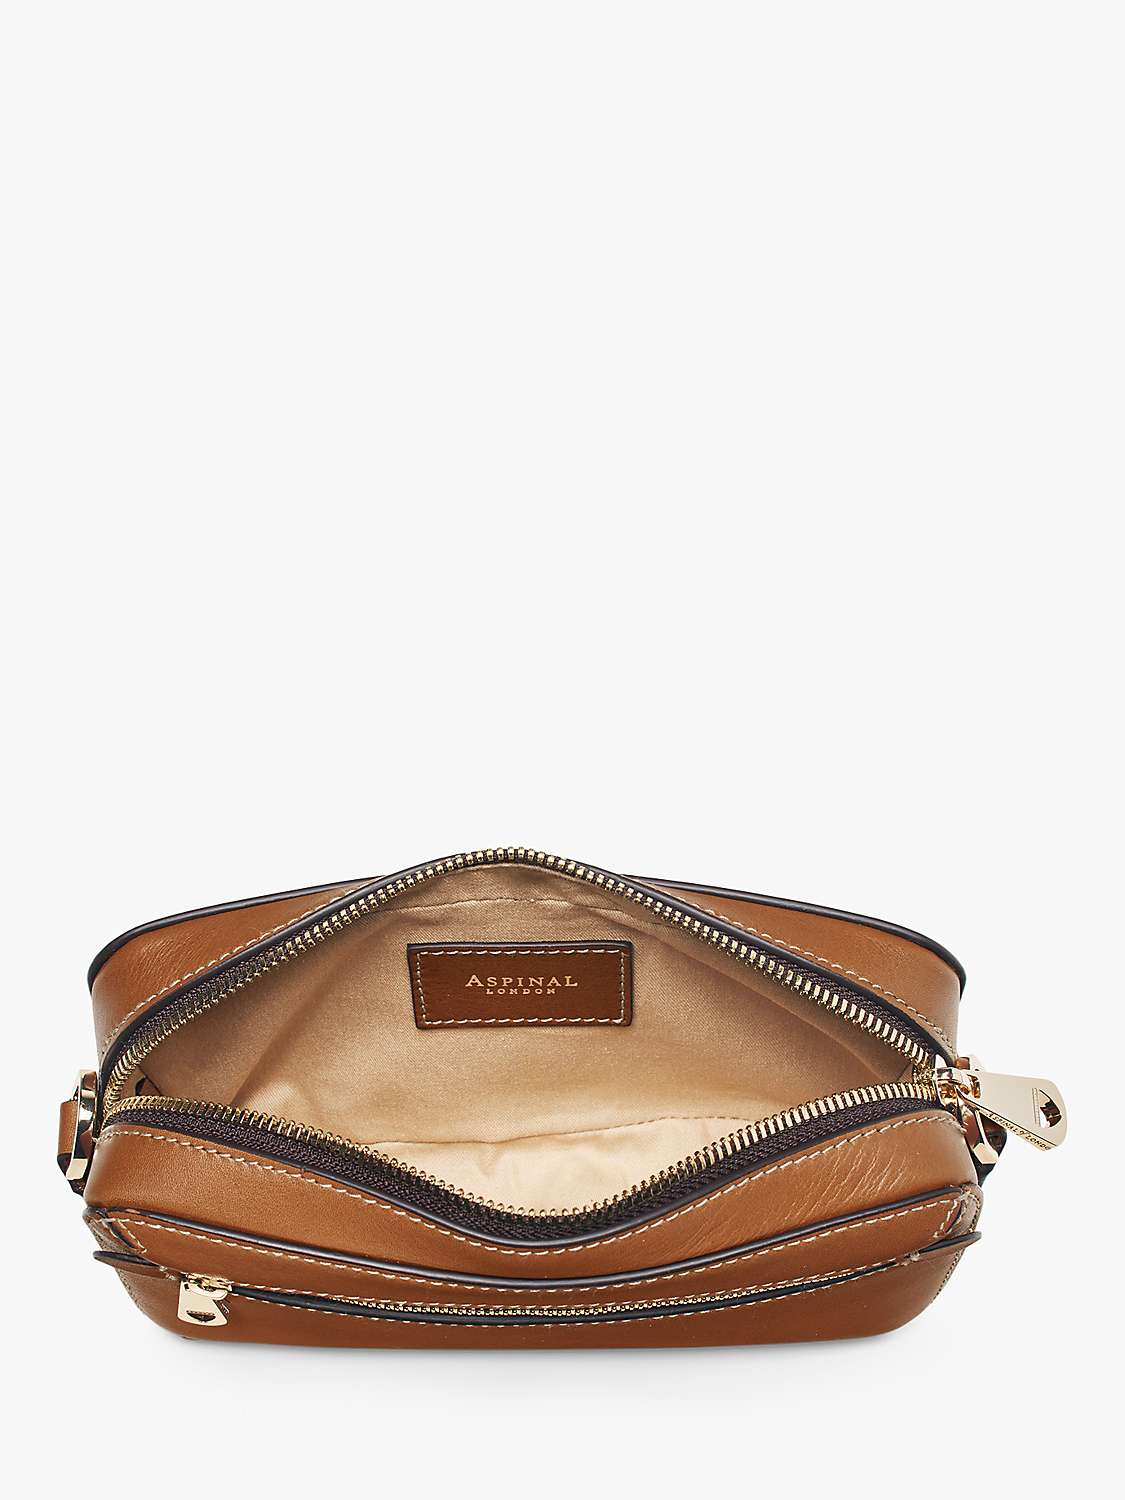 Buy Aspinal of London Smooth Leather Camera Bag, Tan Online at johnlewis.com